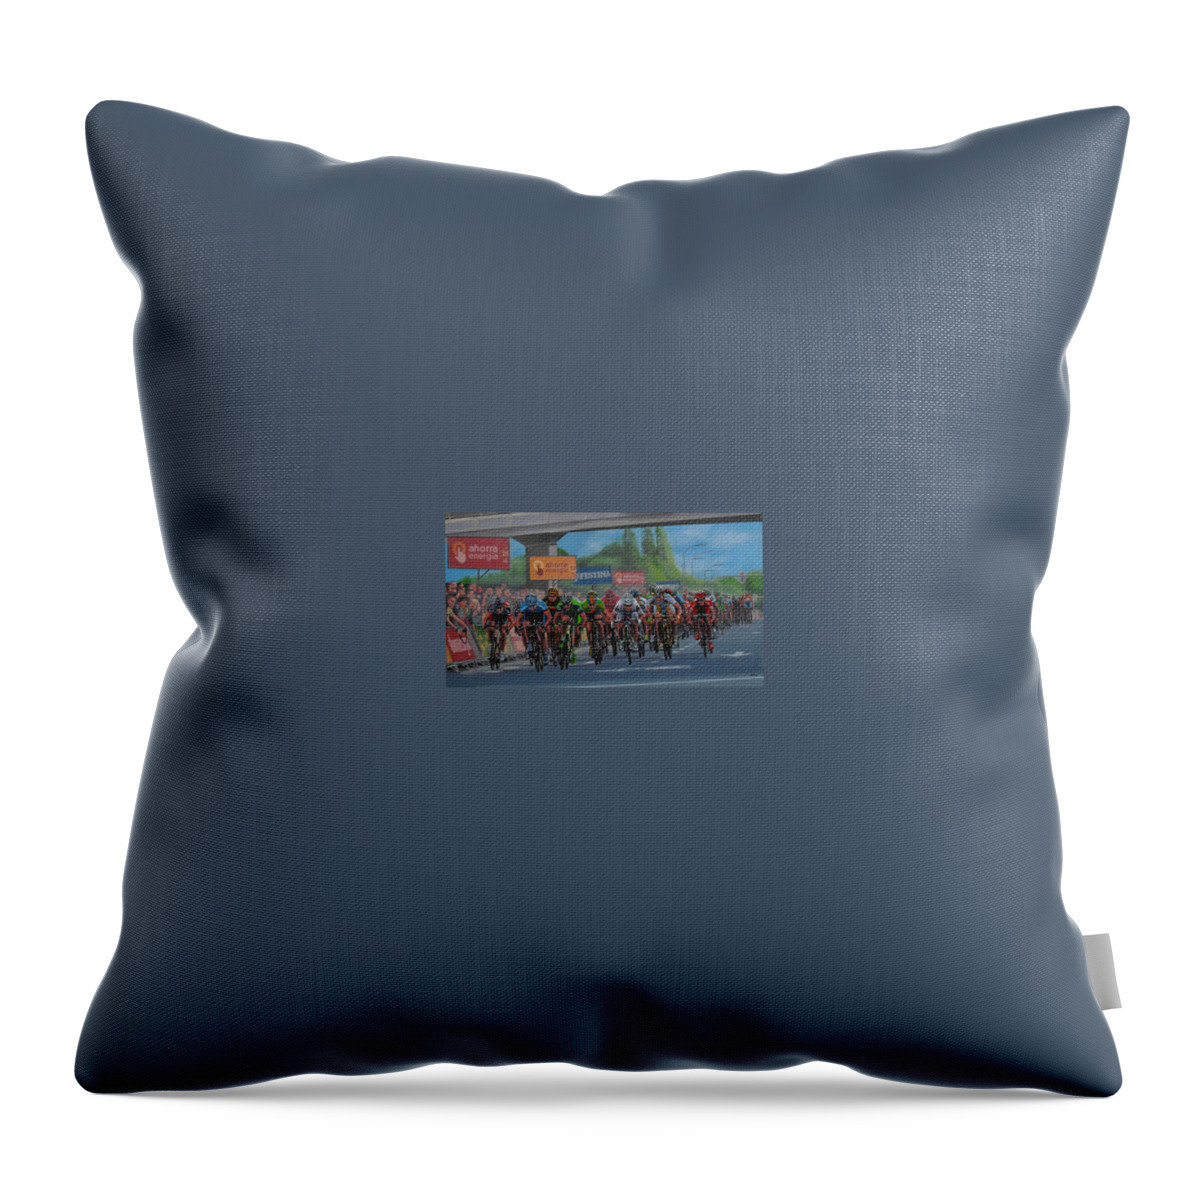 The Vuelta Throw Pillow featuring the painting The Vuelta by Paul Meijering